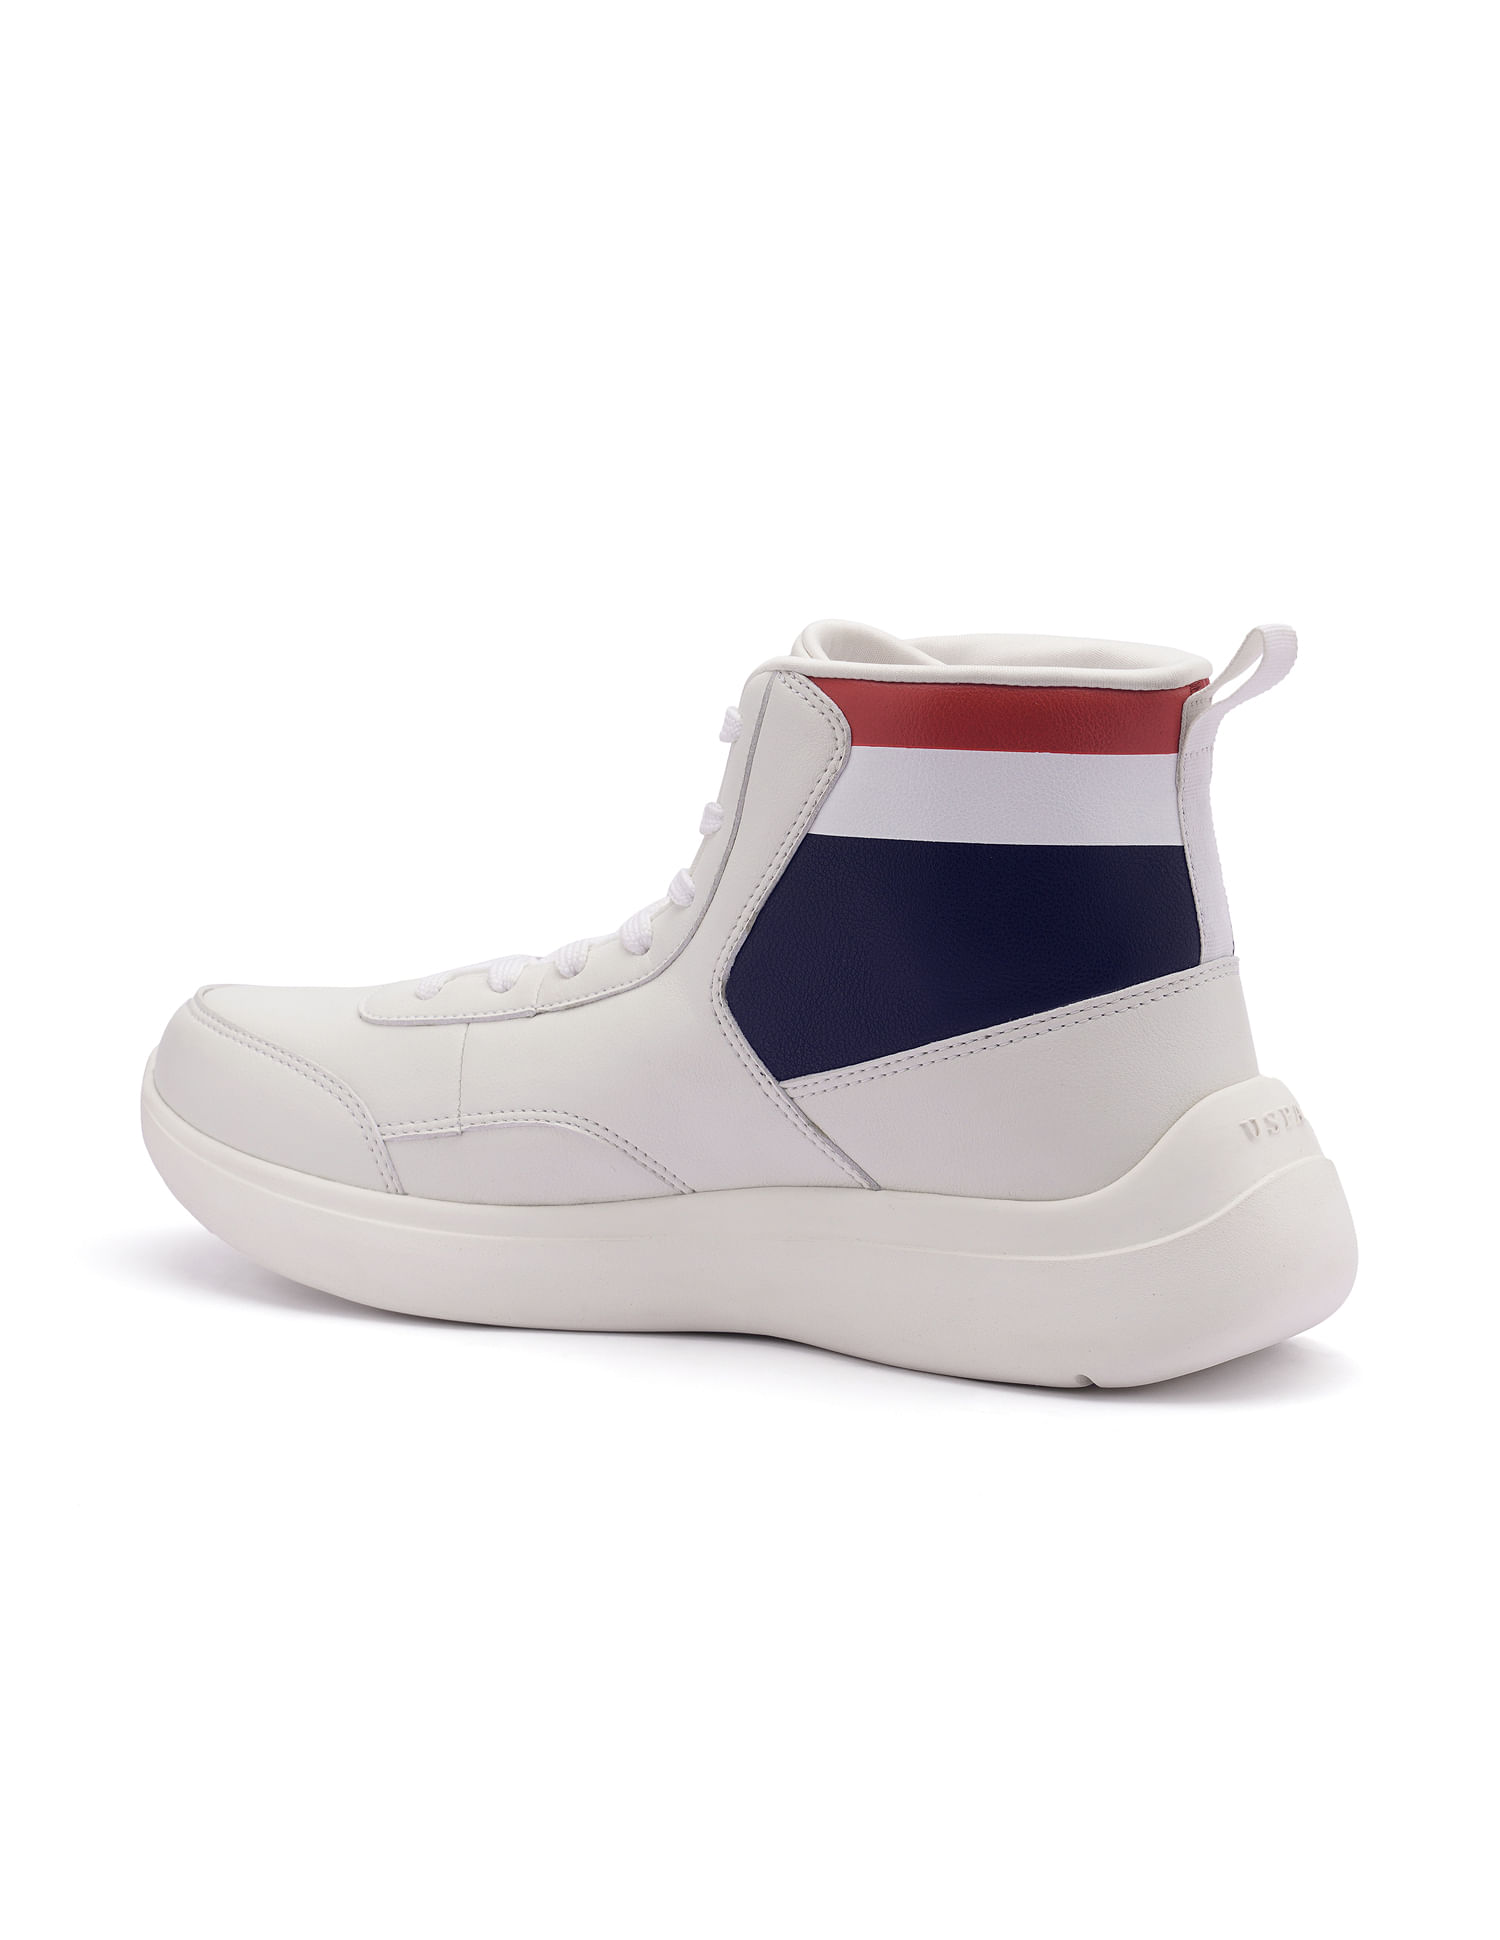 Buy U.S. Polo Assn. Round Toe Linetti High Top Sneakers - NNNOW.com